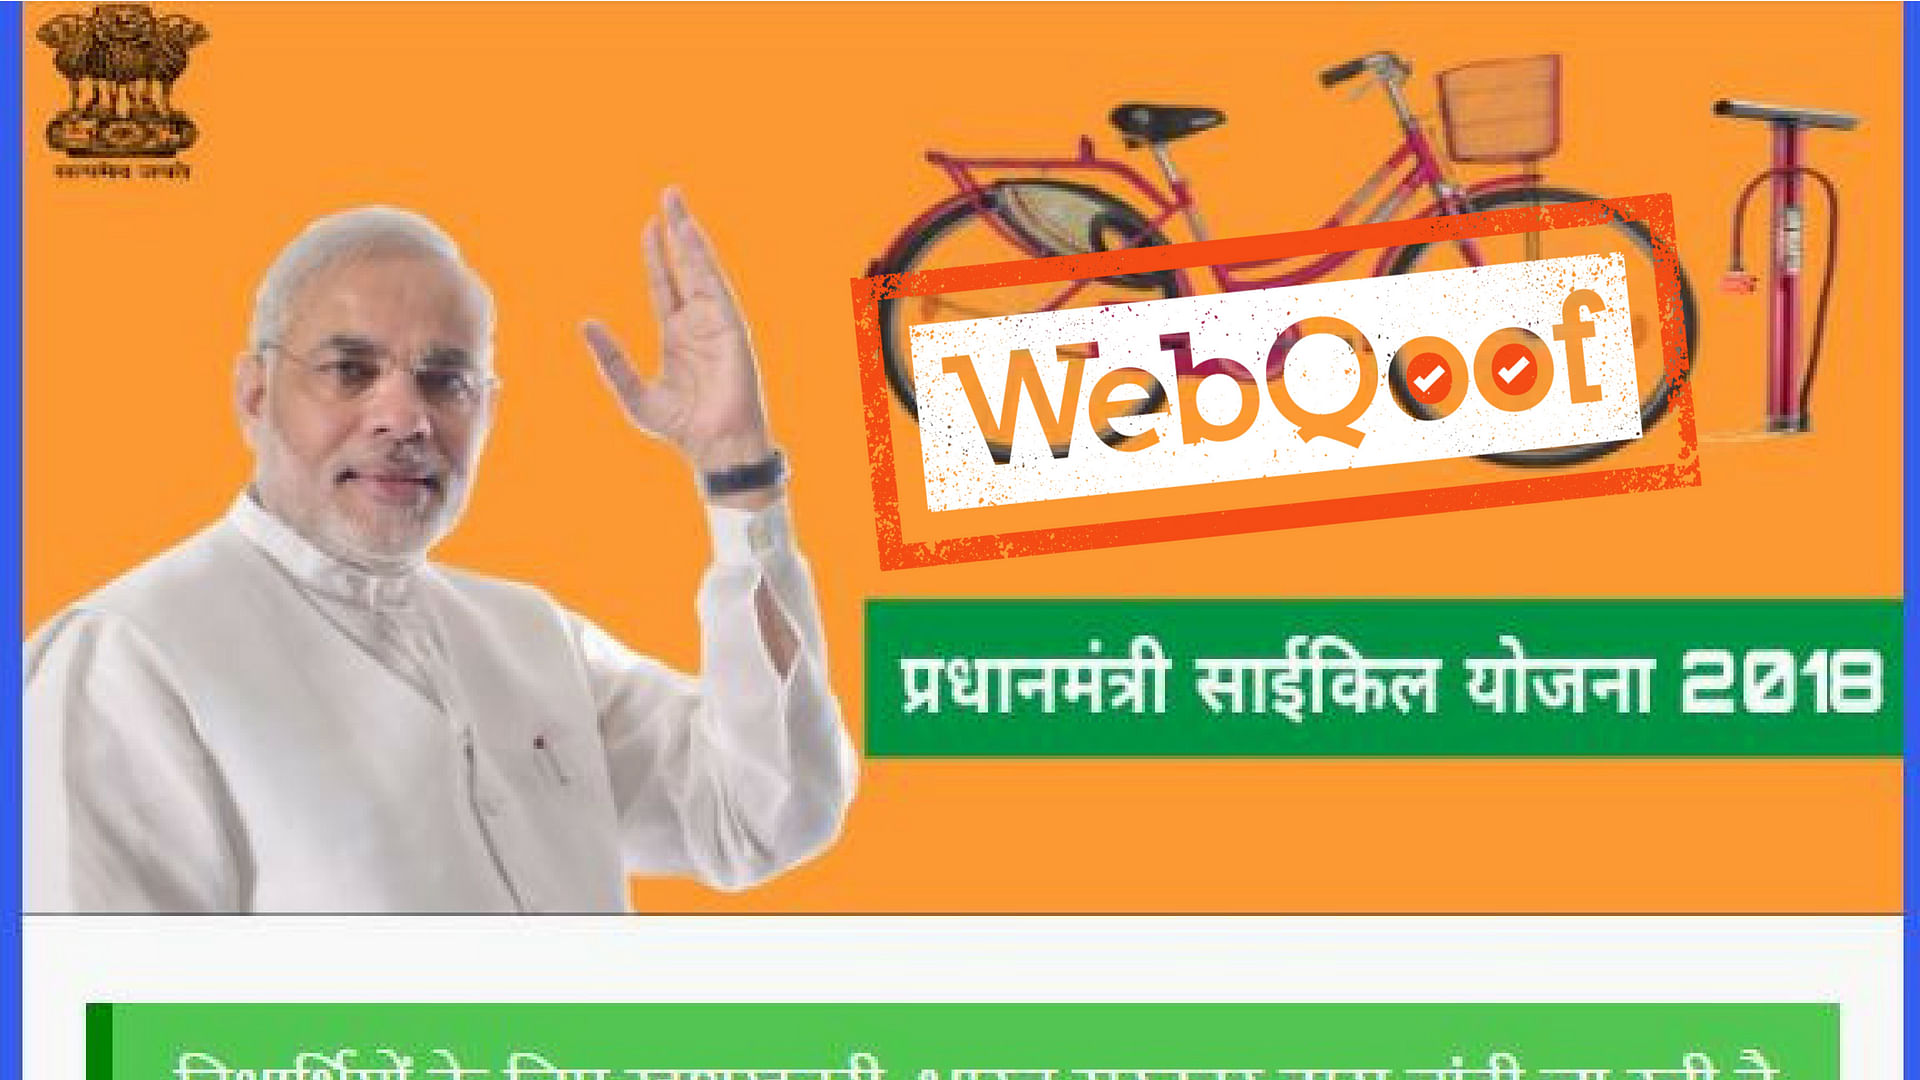 Message claiming free distribution of cycles to students by PM Modi on 15 August is fake.&nbsp;